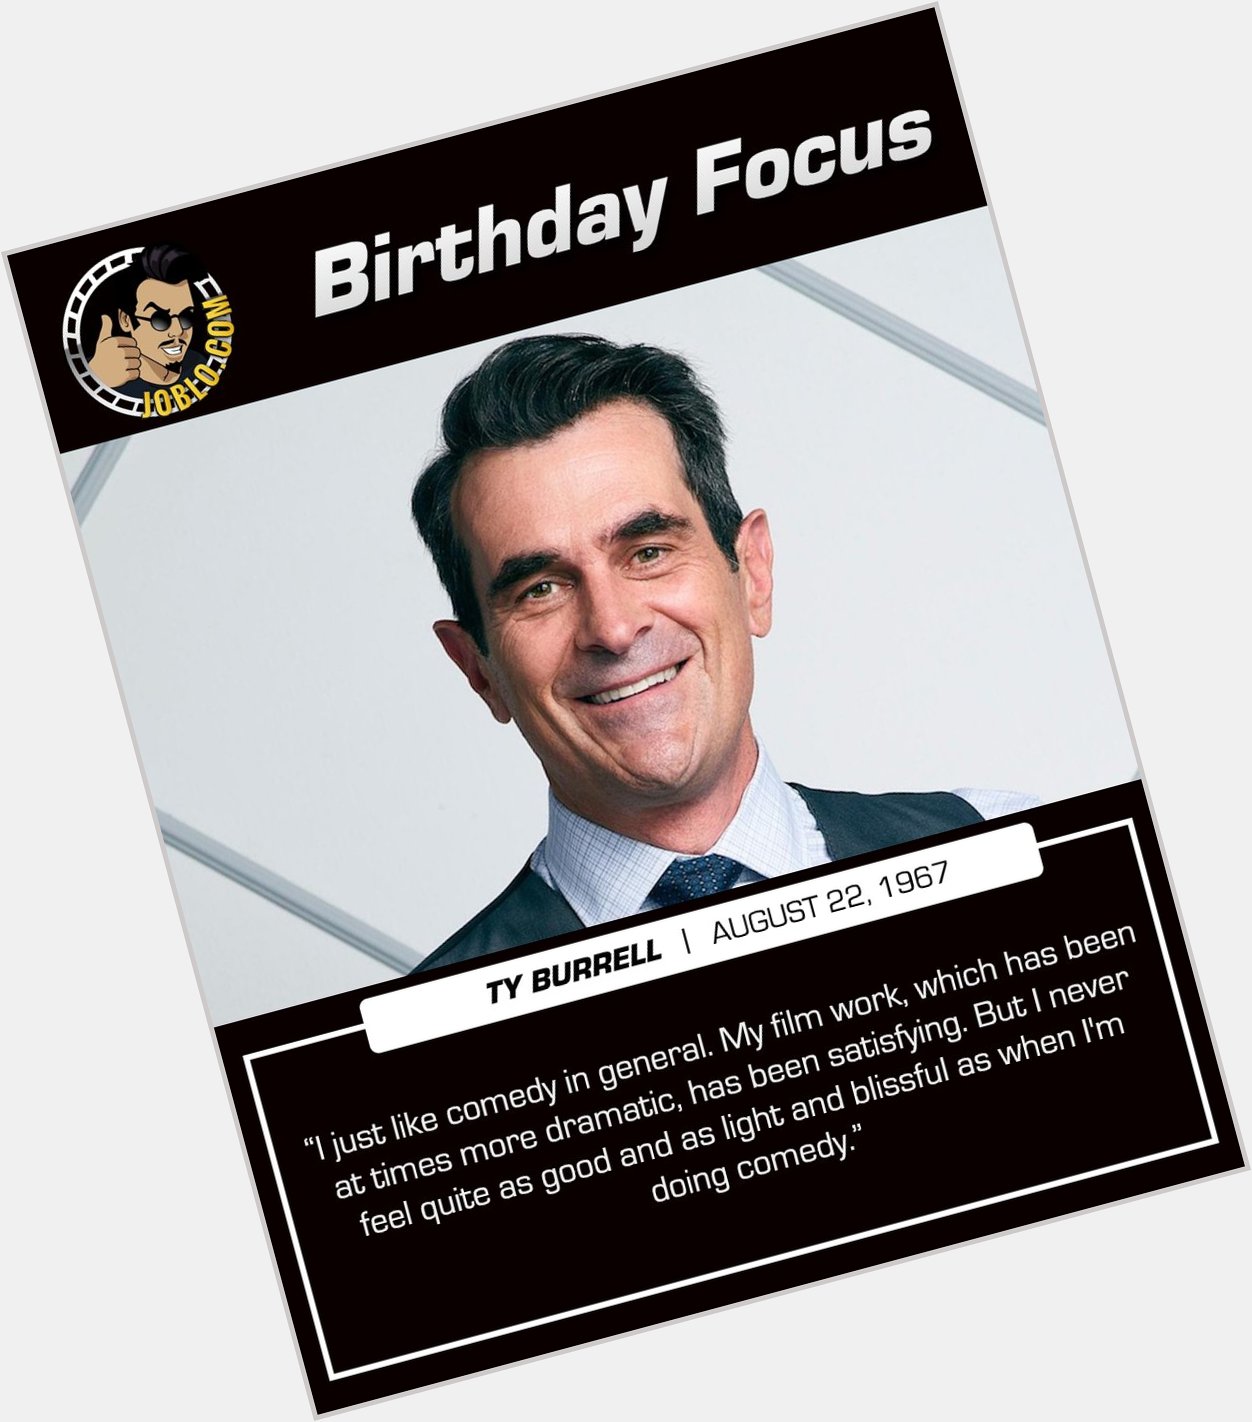 Happy 53rd birthday to a favorite TV dad, Ty Burrell! 